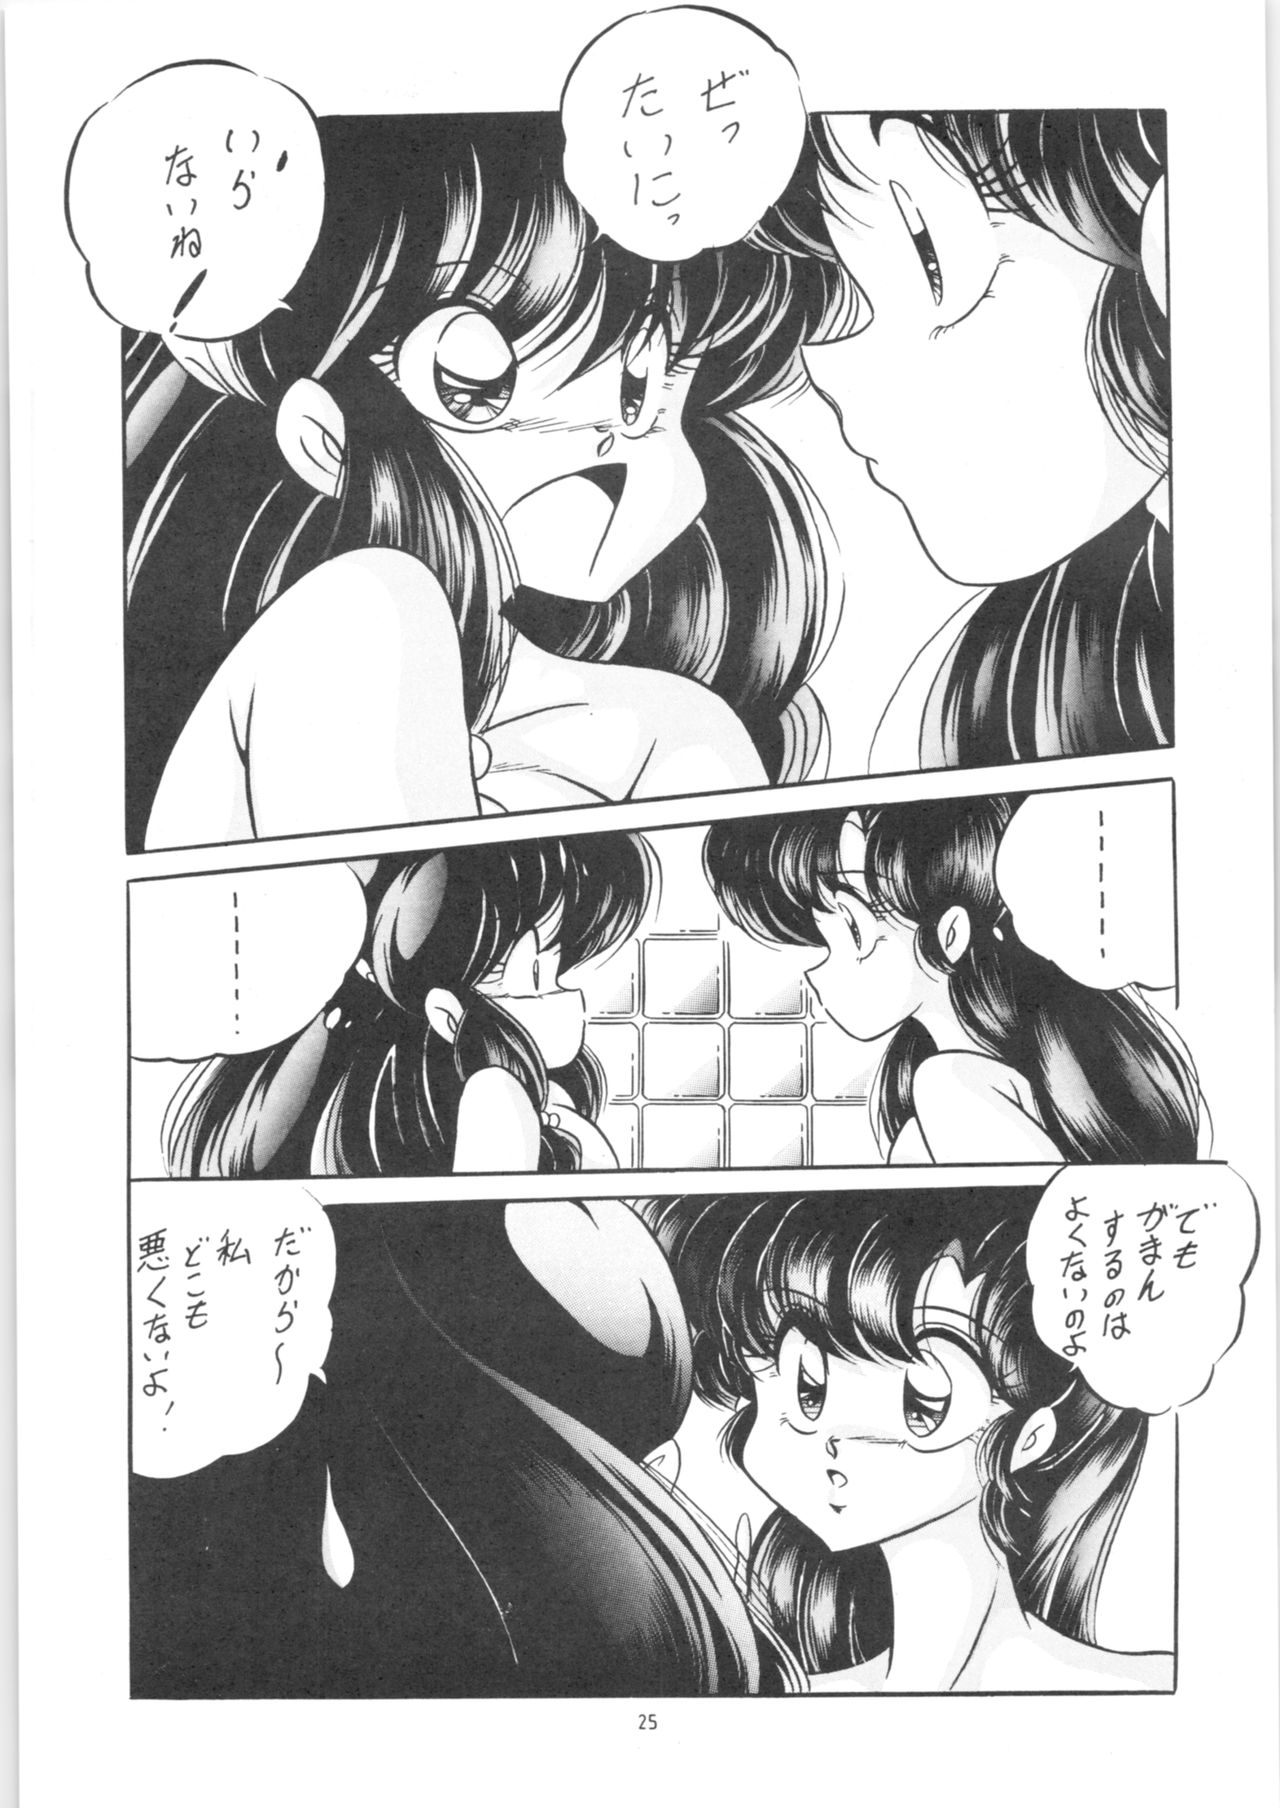 [C-COMPANY] C-COMPANY SPECIAL STAGE 13 (Ranma 1/2) page 26 full